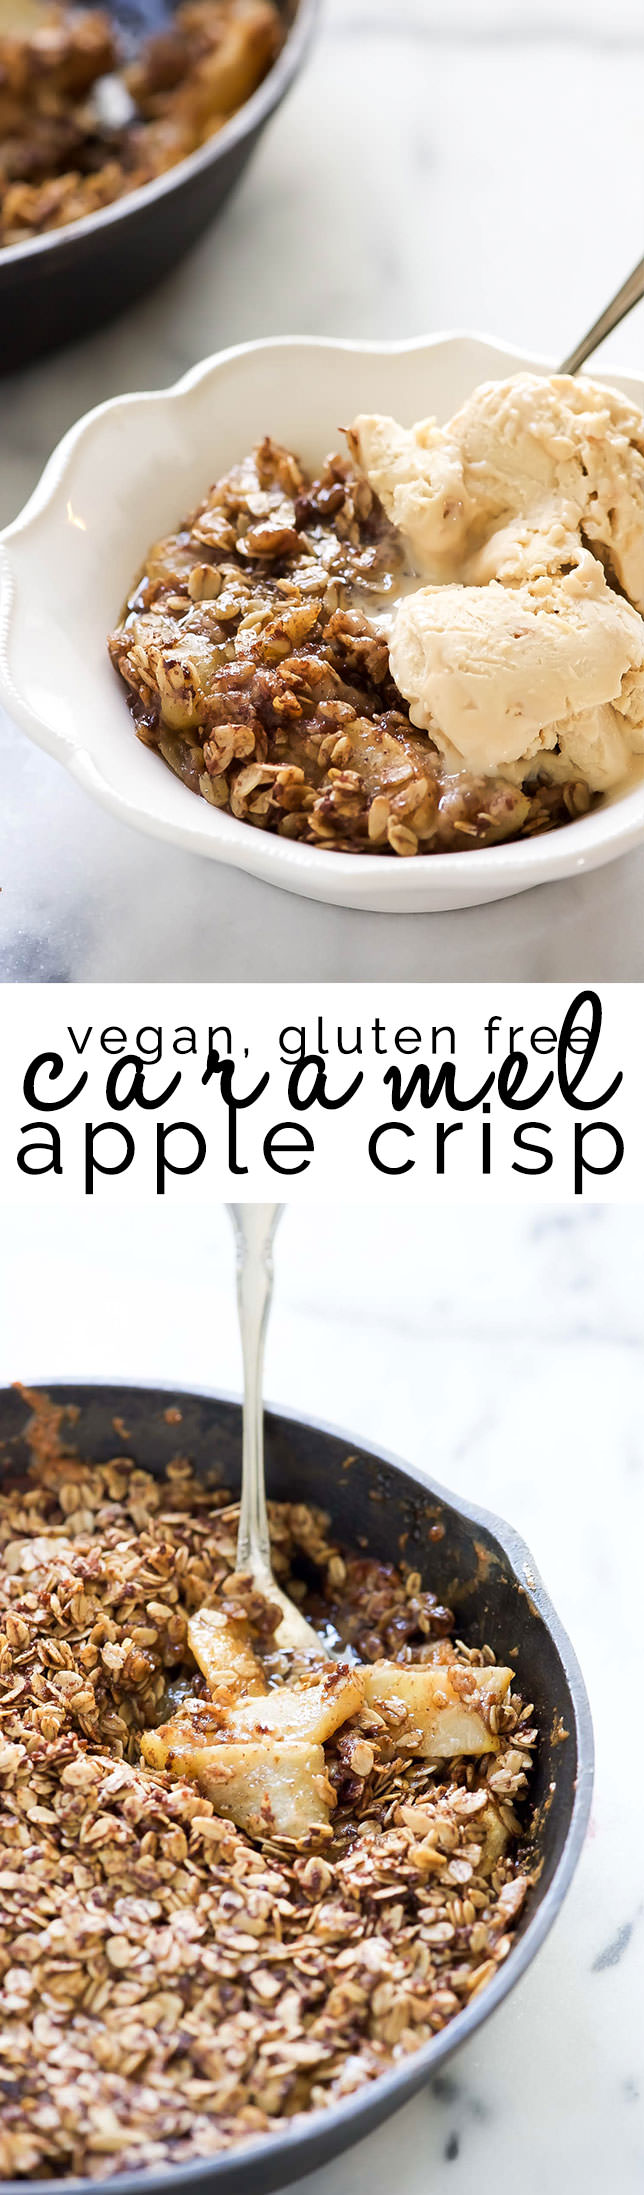 This Caramel Apple Crisp is filled with a gooey, naturally sweetened caramel sauce and topped with a wholesome oat topping! With only 8 ingredients, this secretly healthier dessert will be on repeat all season long!